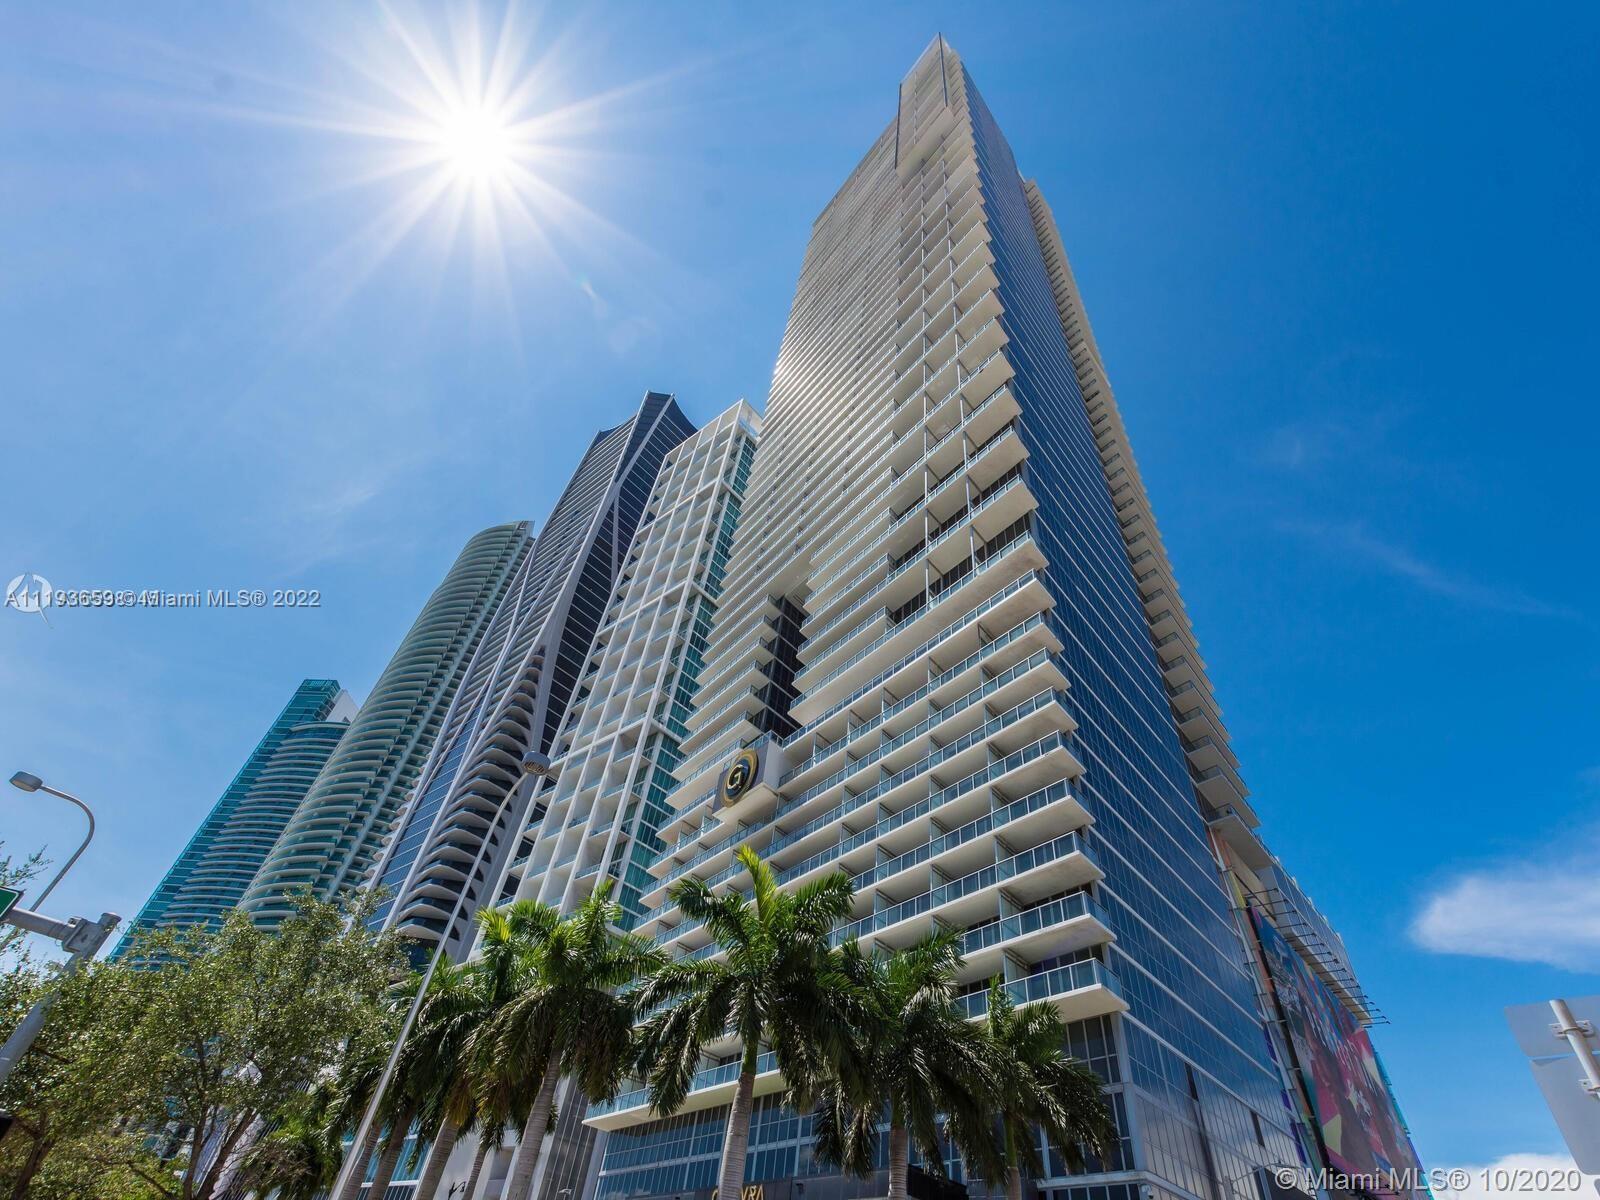 Exquisite 2 Bed | 2.5 Bat with stunning views of the Bay, Miami Beach & Sunsets! Foyer entry with pr